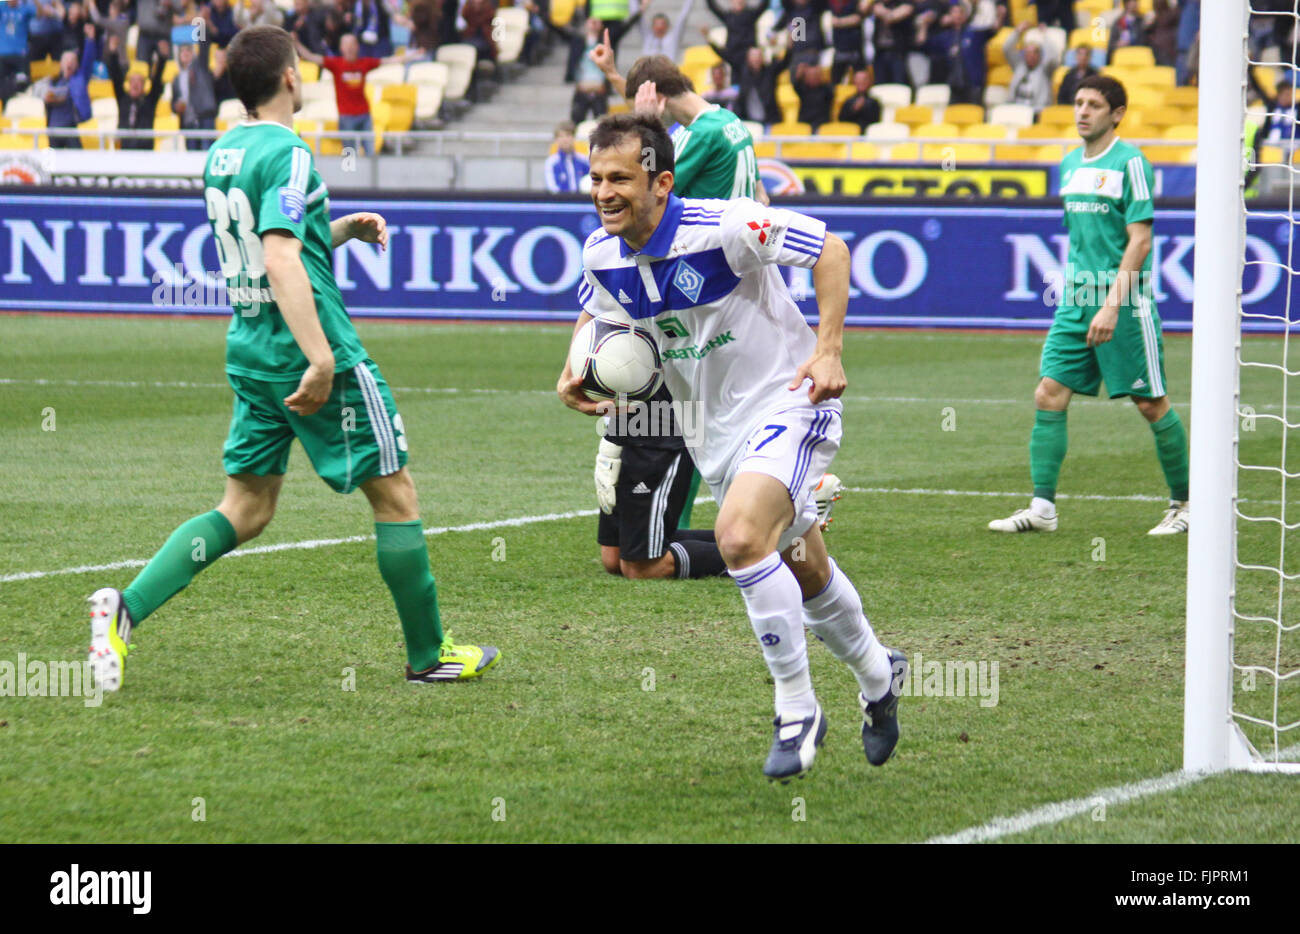 KYIV, UKRAINE - APRIL 14, 2012: Carlos Correa of Dynamo Kyiv (R) reacts after he scored a goal during during Ukraine Championshi Stock Photo